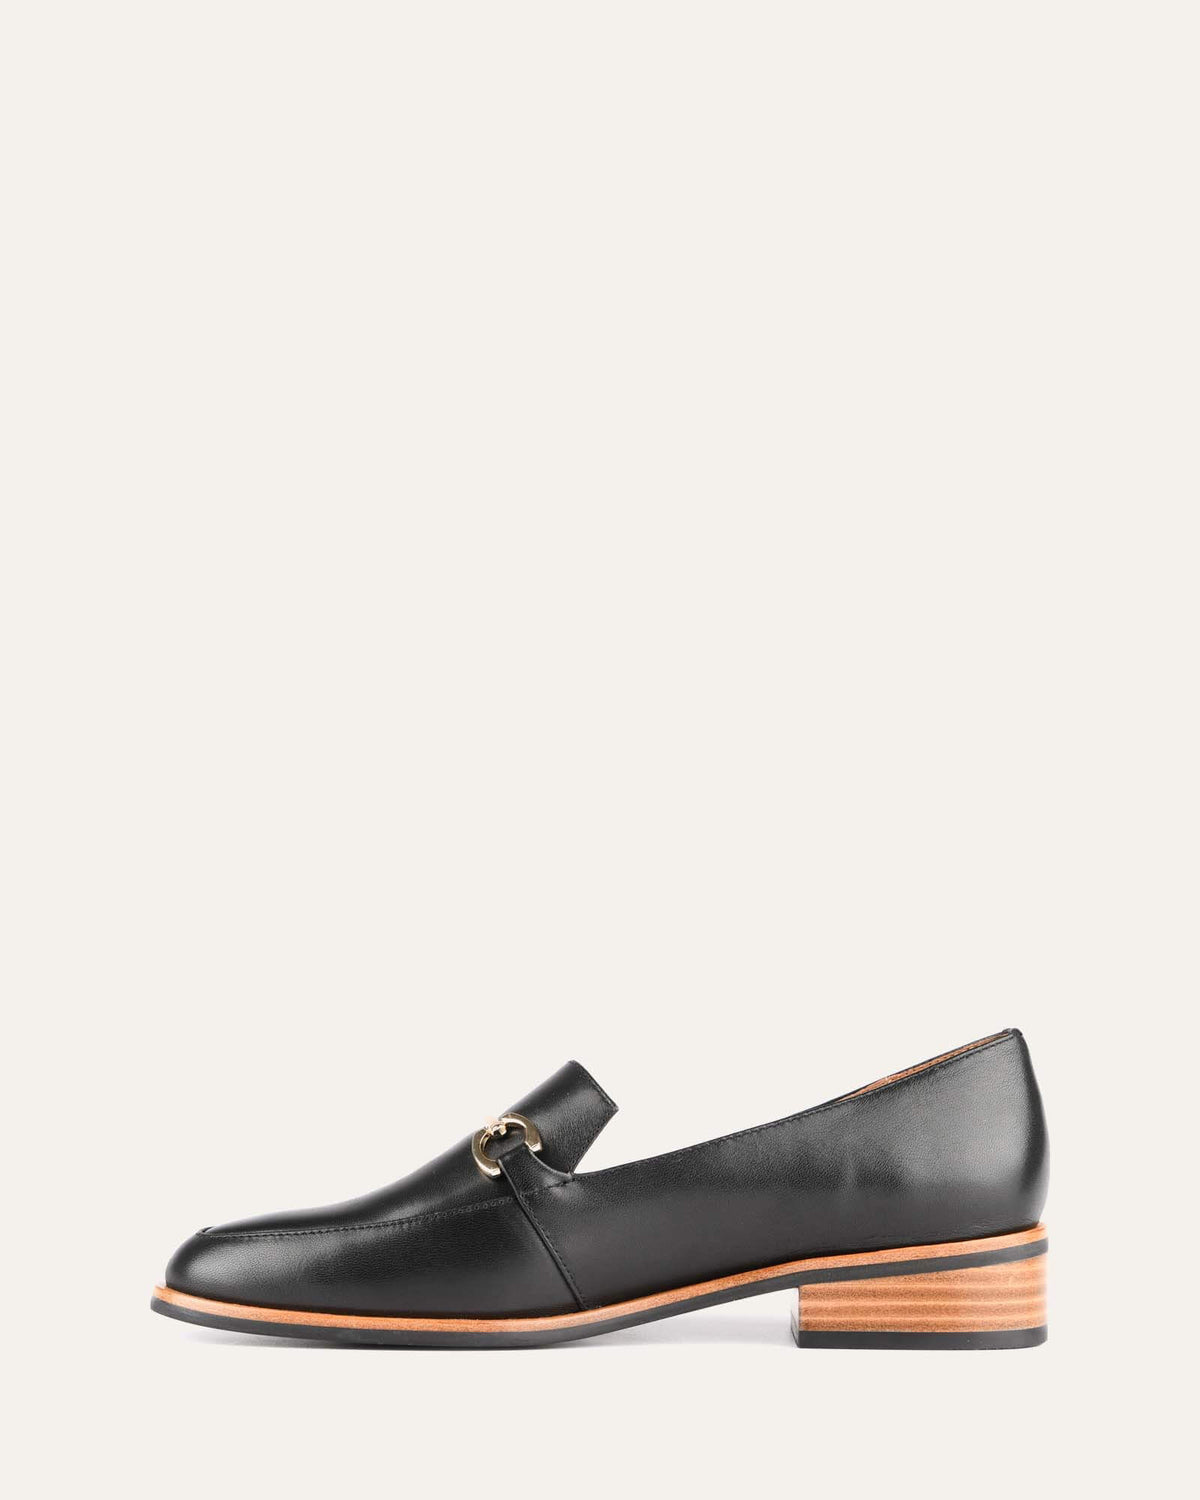 ROCKWELL LOAFERS BLACK LEATHER